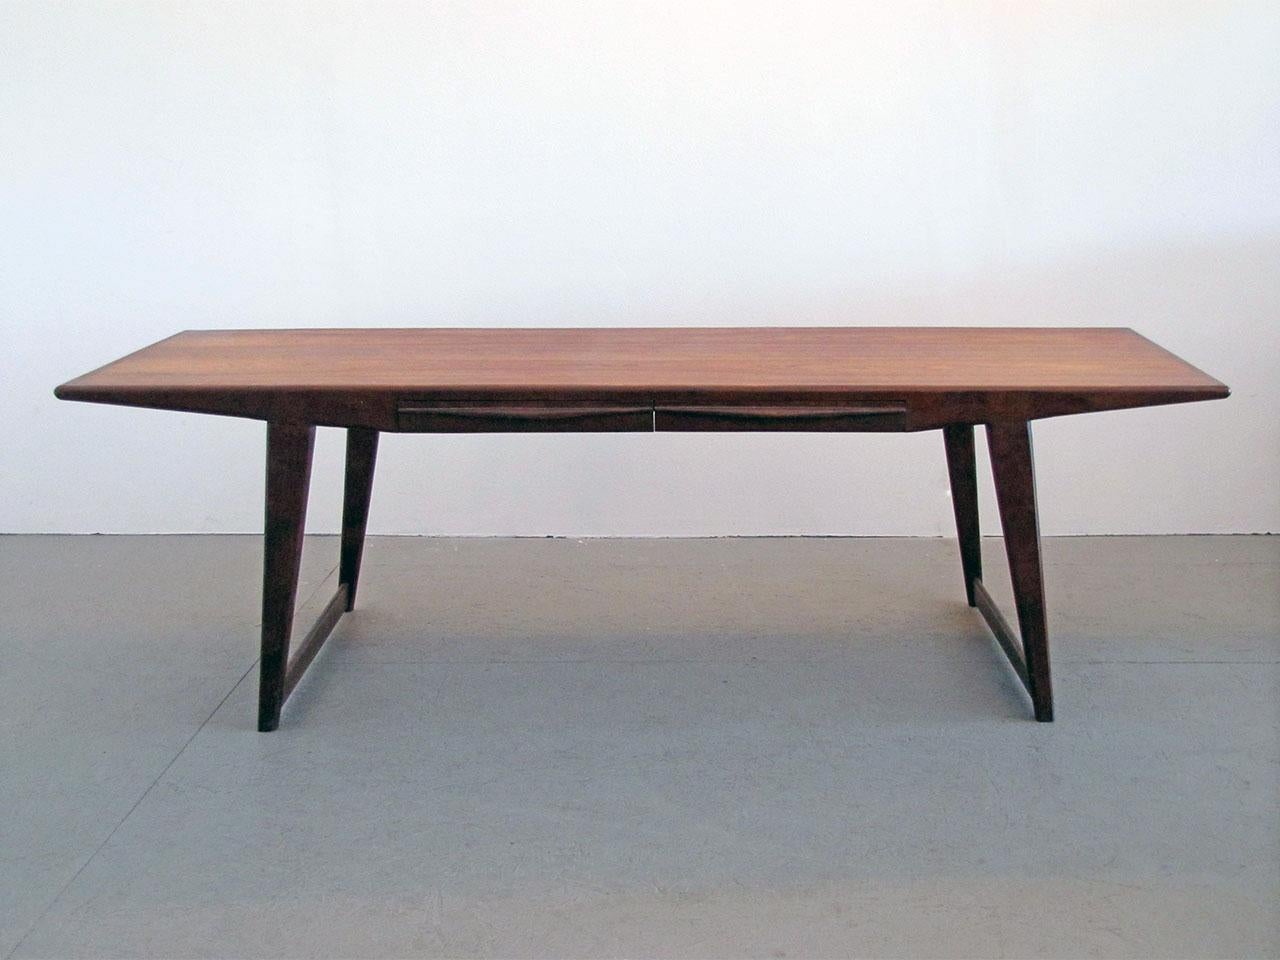 Wonderful rosewood coffee table by Johannes Andersen with two sculptural drawers seamlessly integrated in the tabletop.